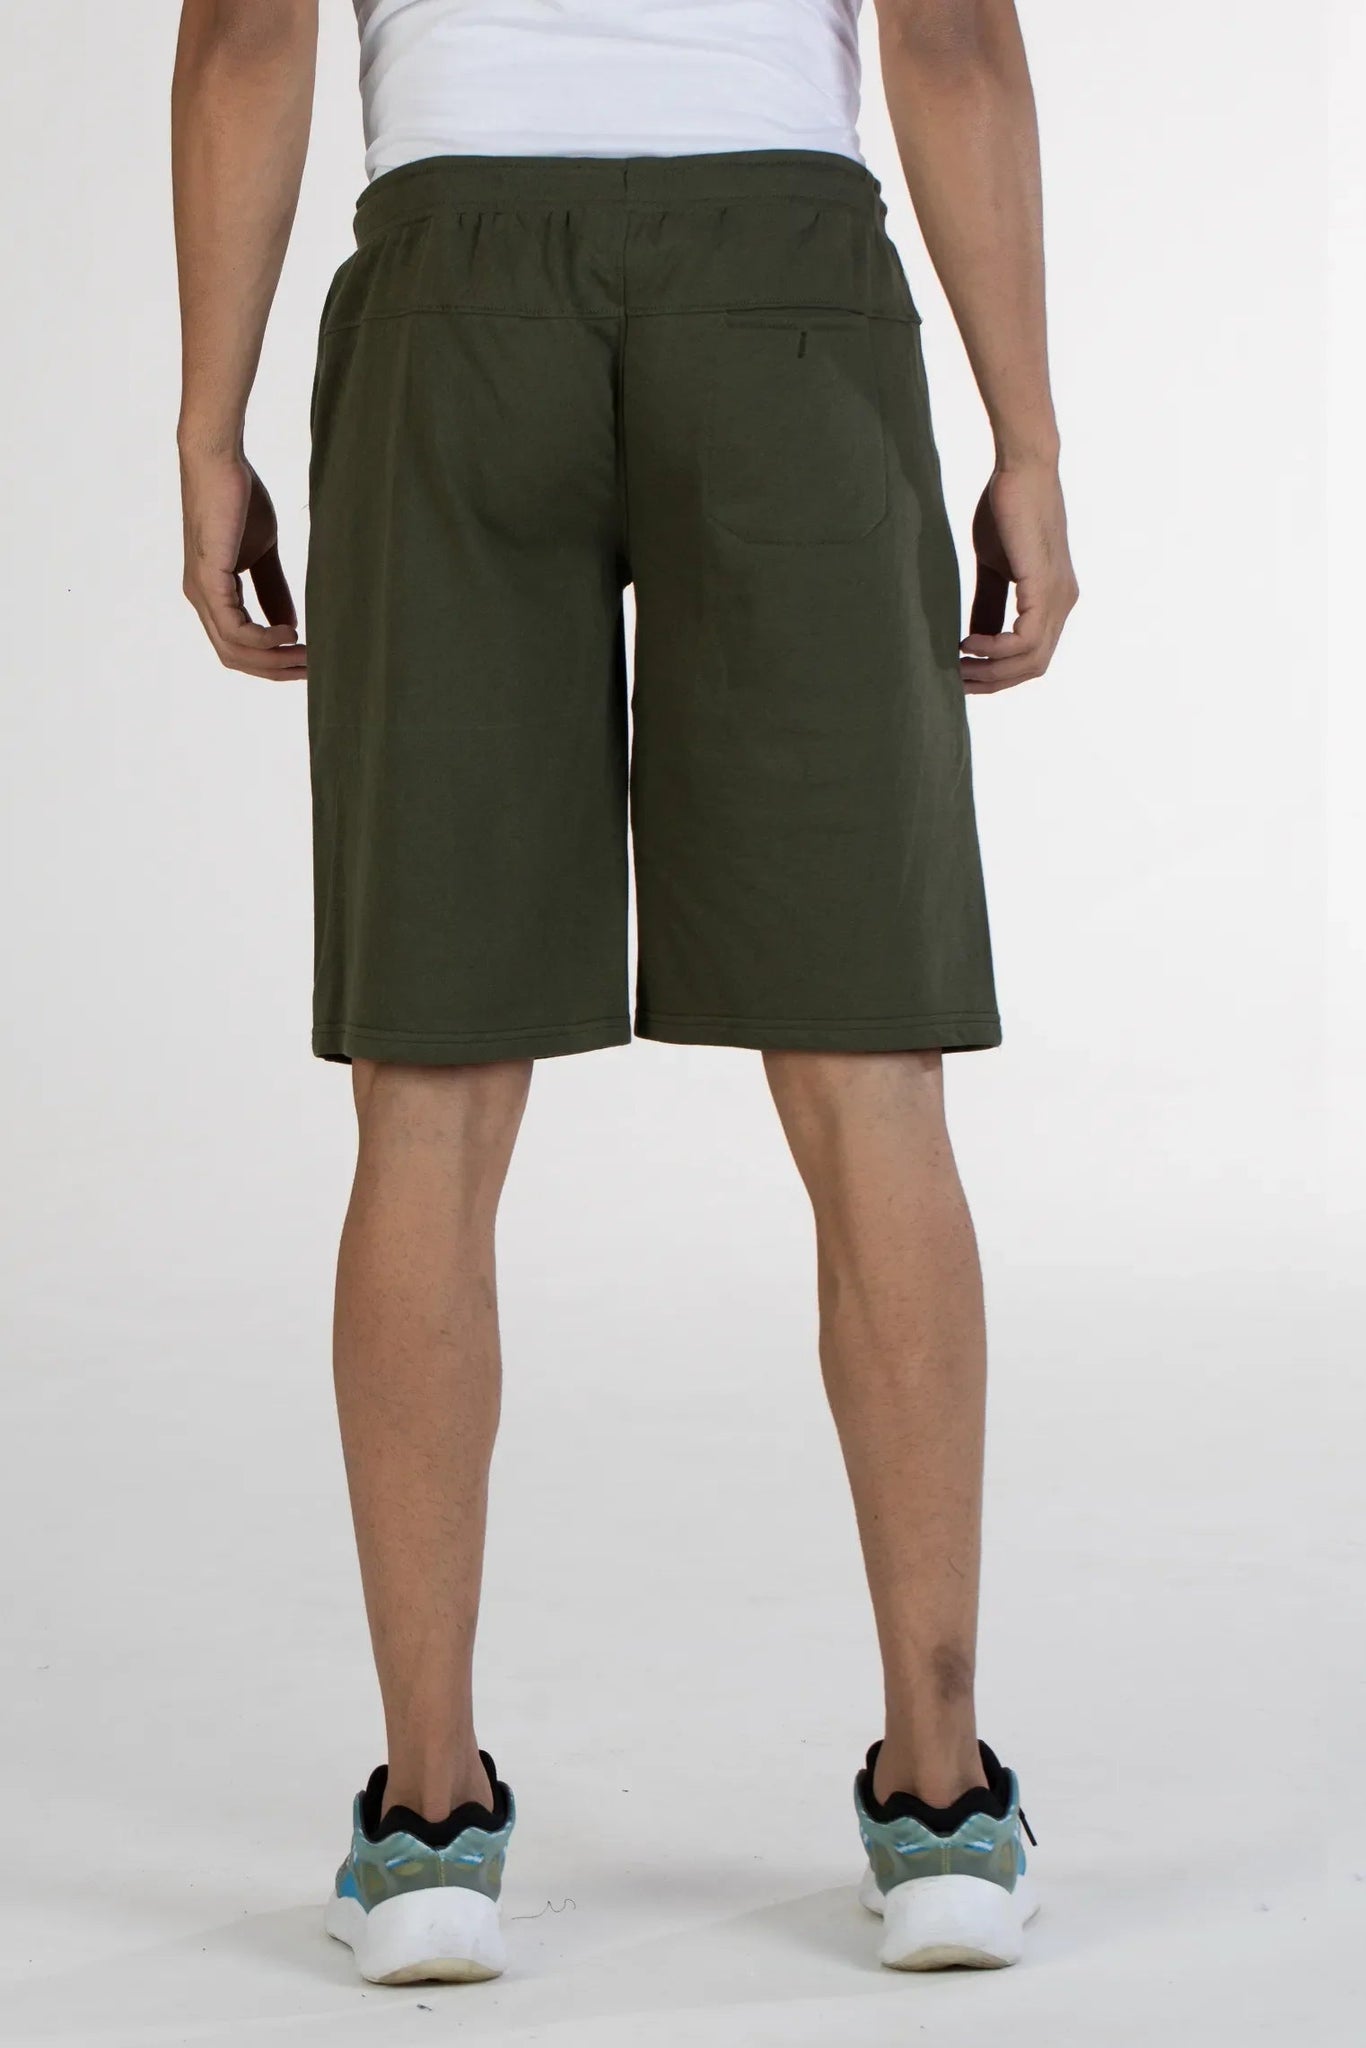 Buy Sloid Knit Cotton Shorts Online.